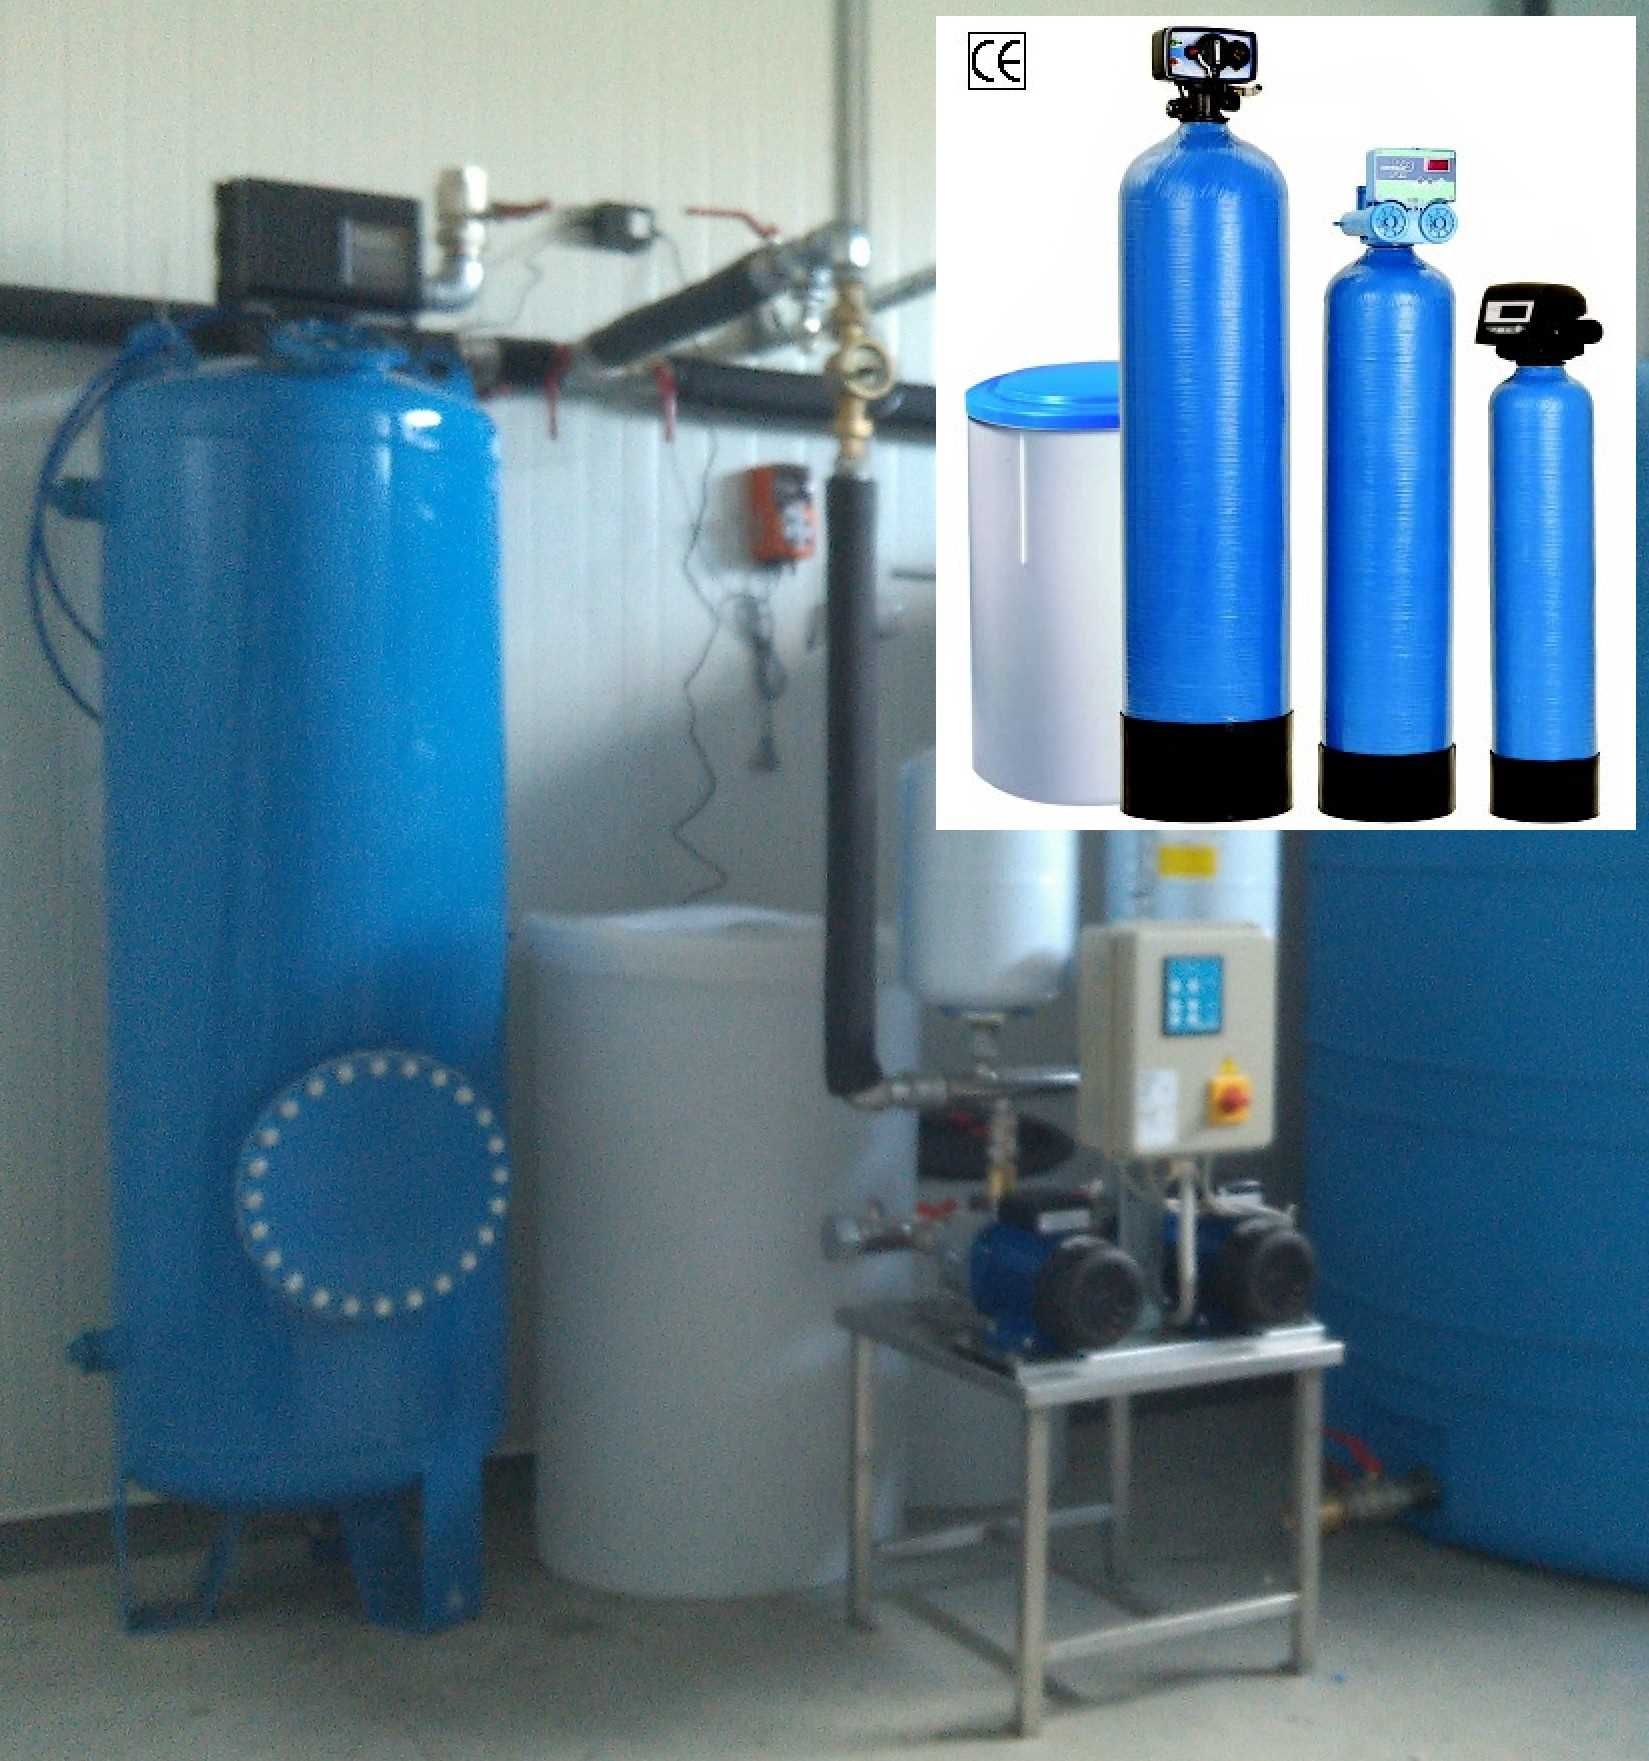 Water purification and water softening